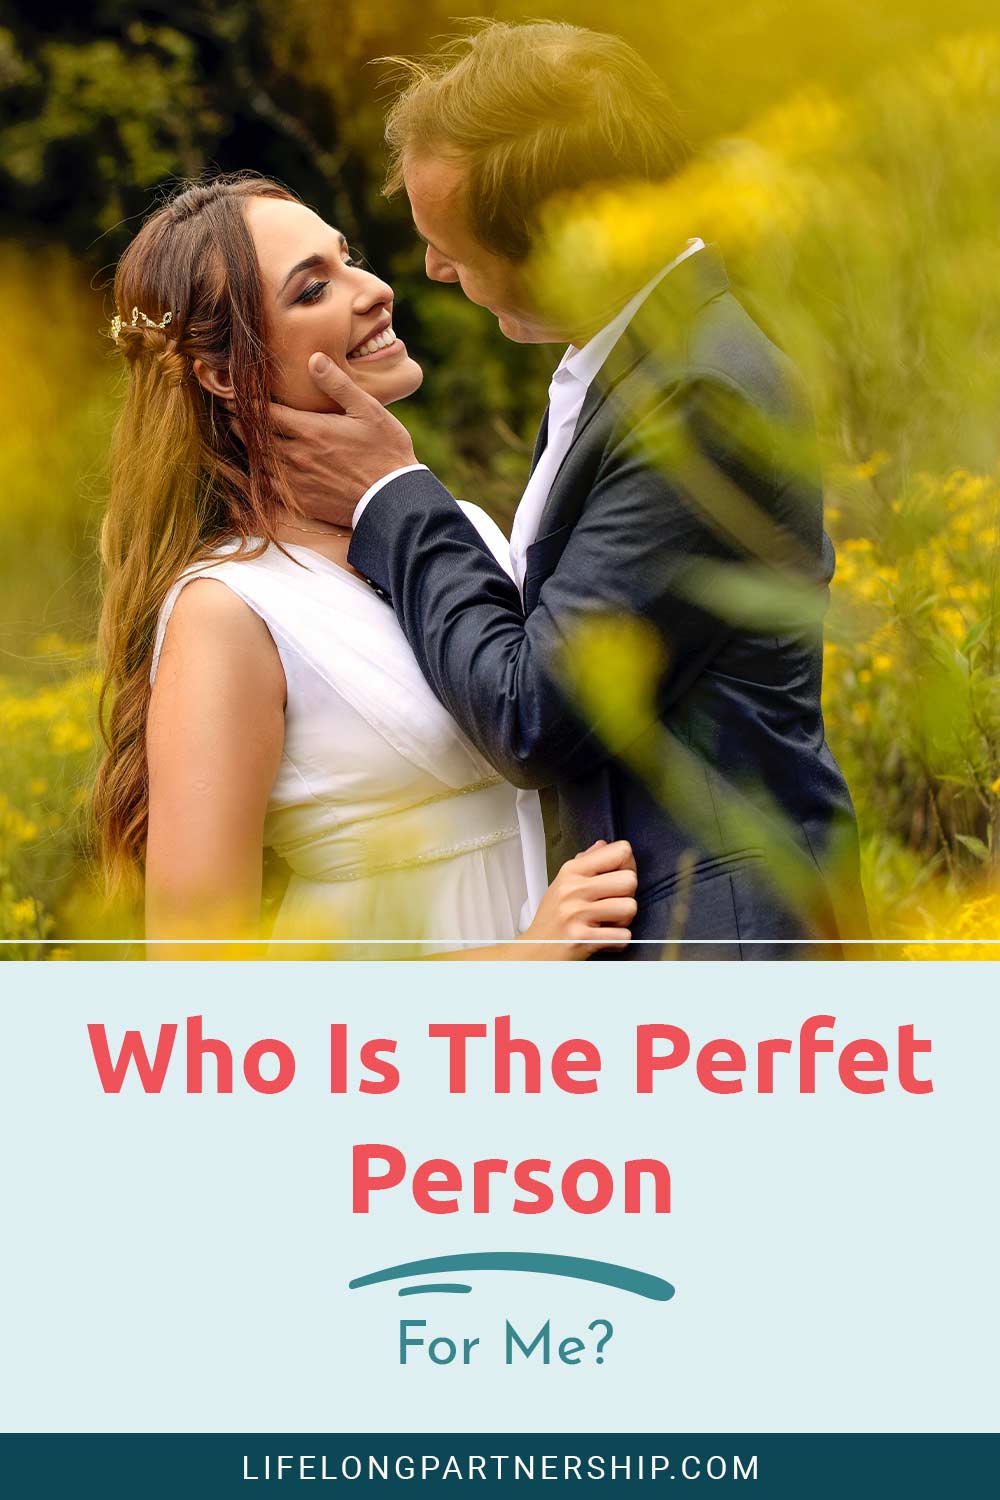 Who Is The Perfet Person For Me?